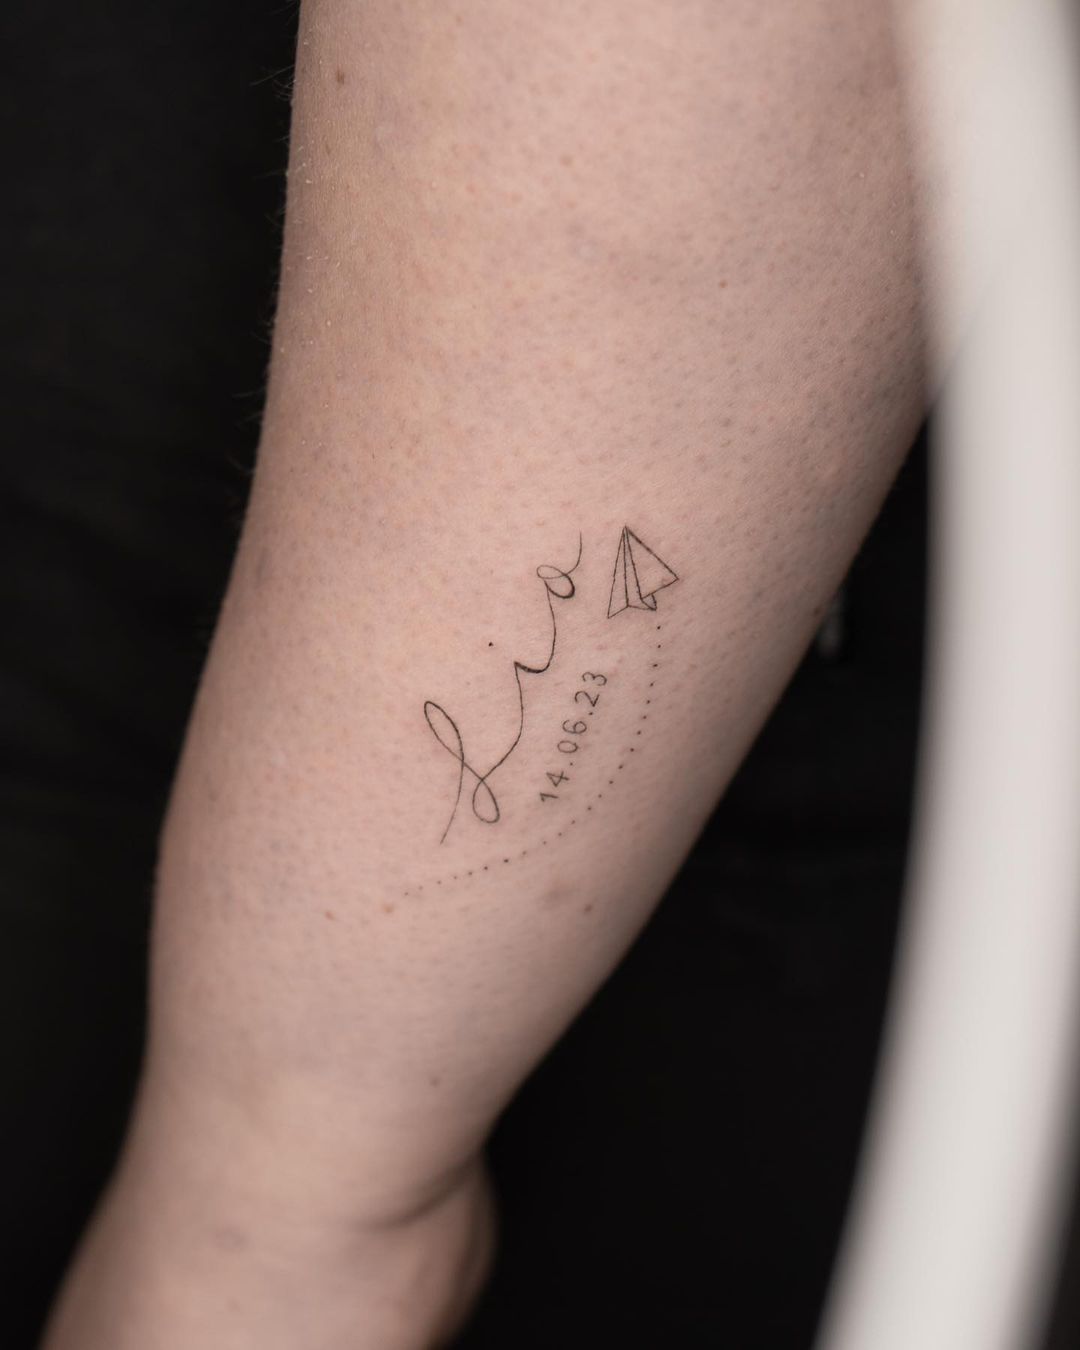 Chic 'lio' Name Tattoo With Paper Plane Design